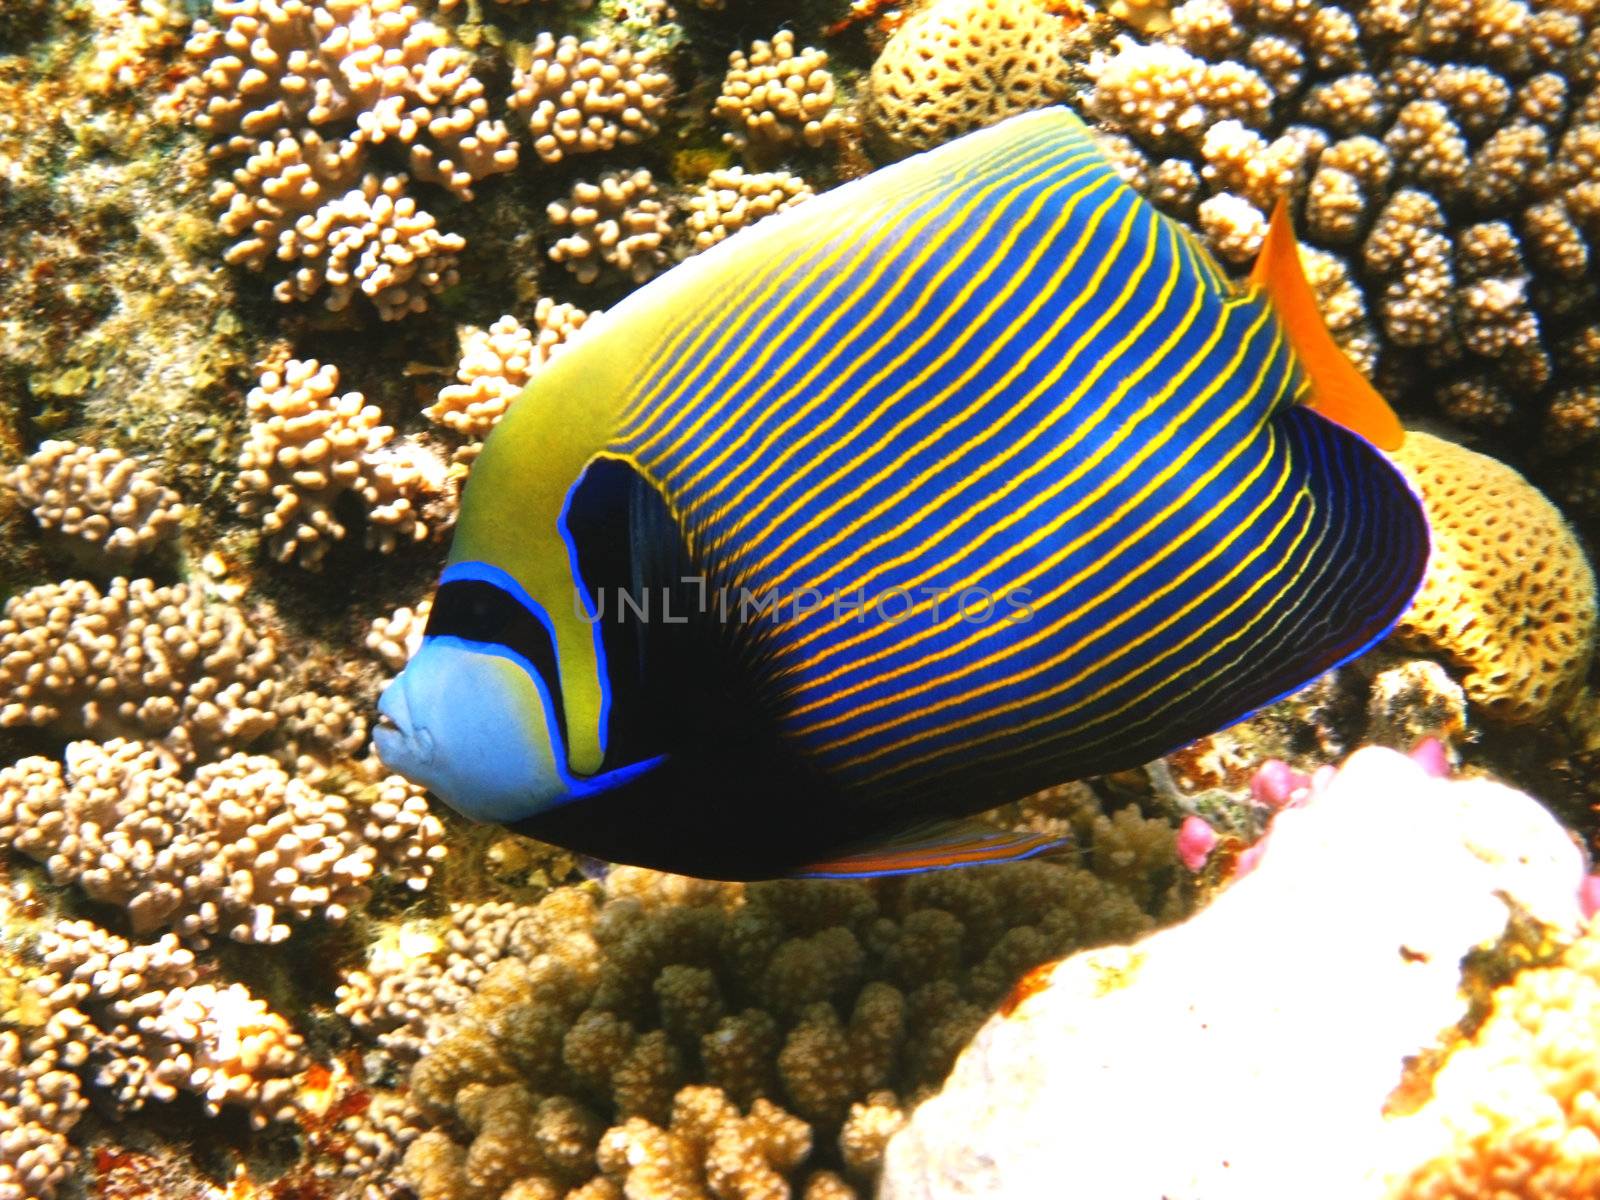 Emperor angelfish and coral reef by vintrom